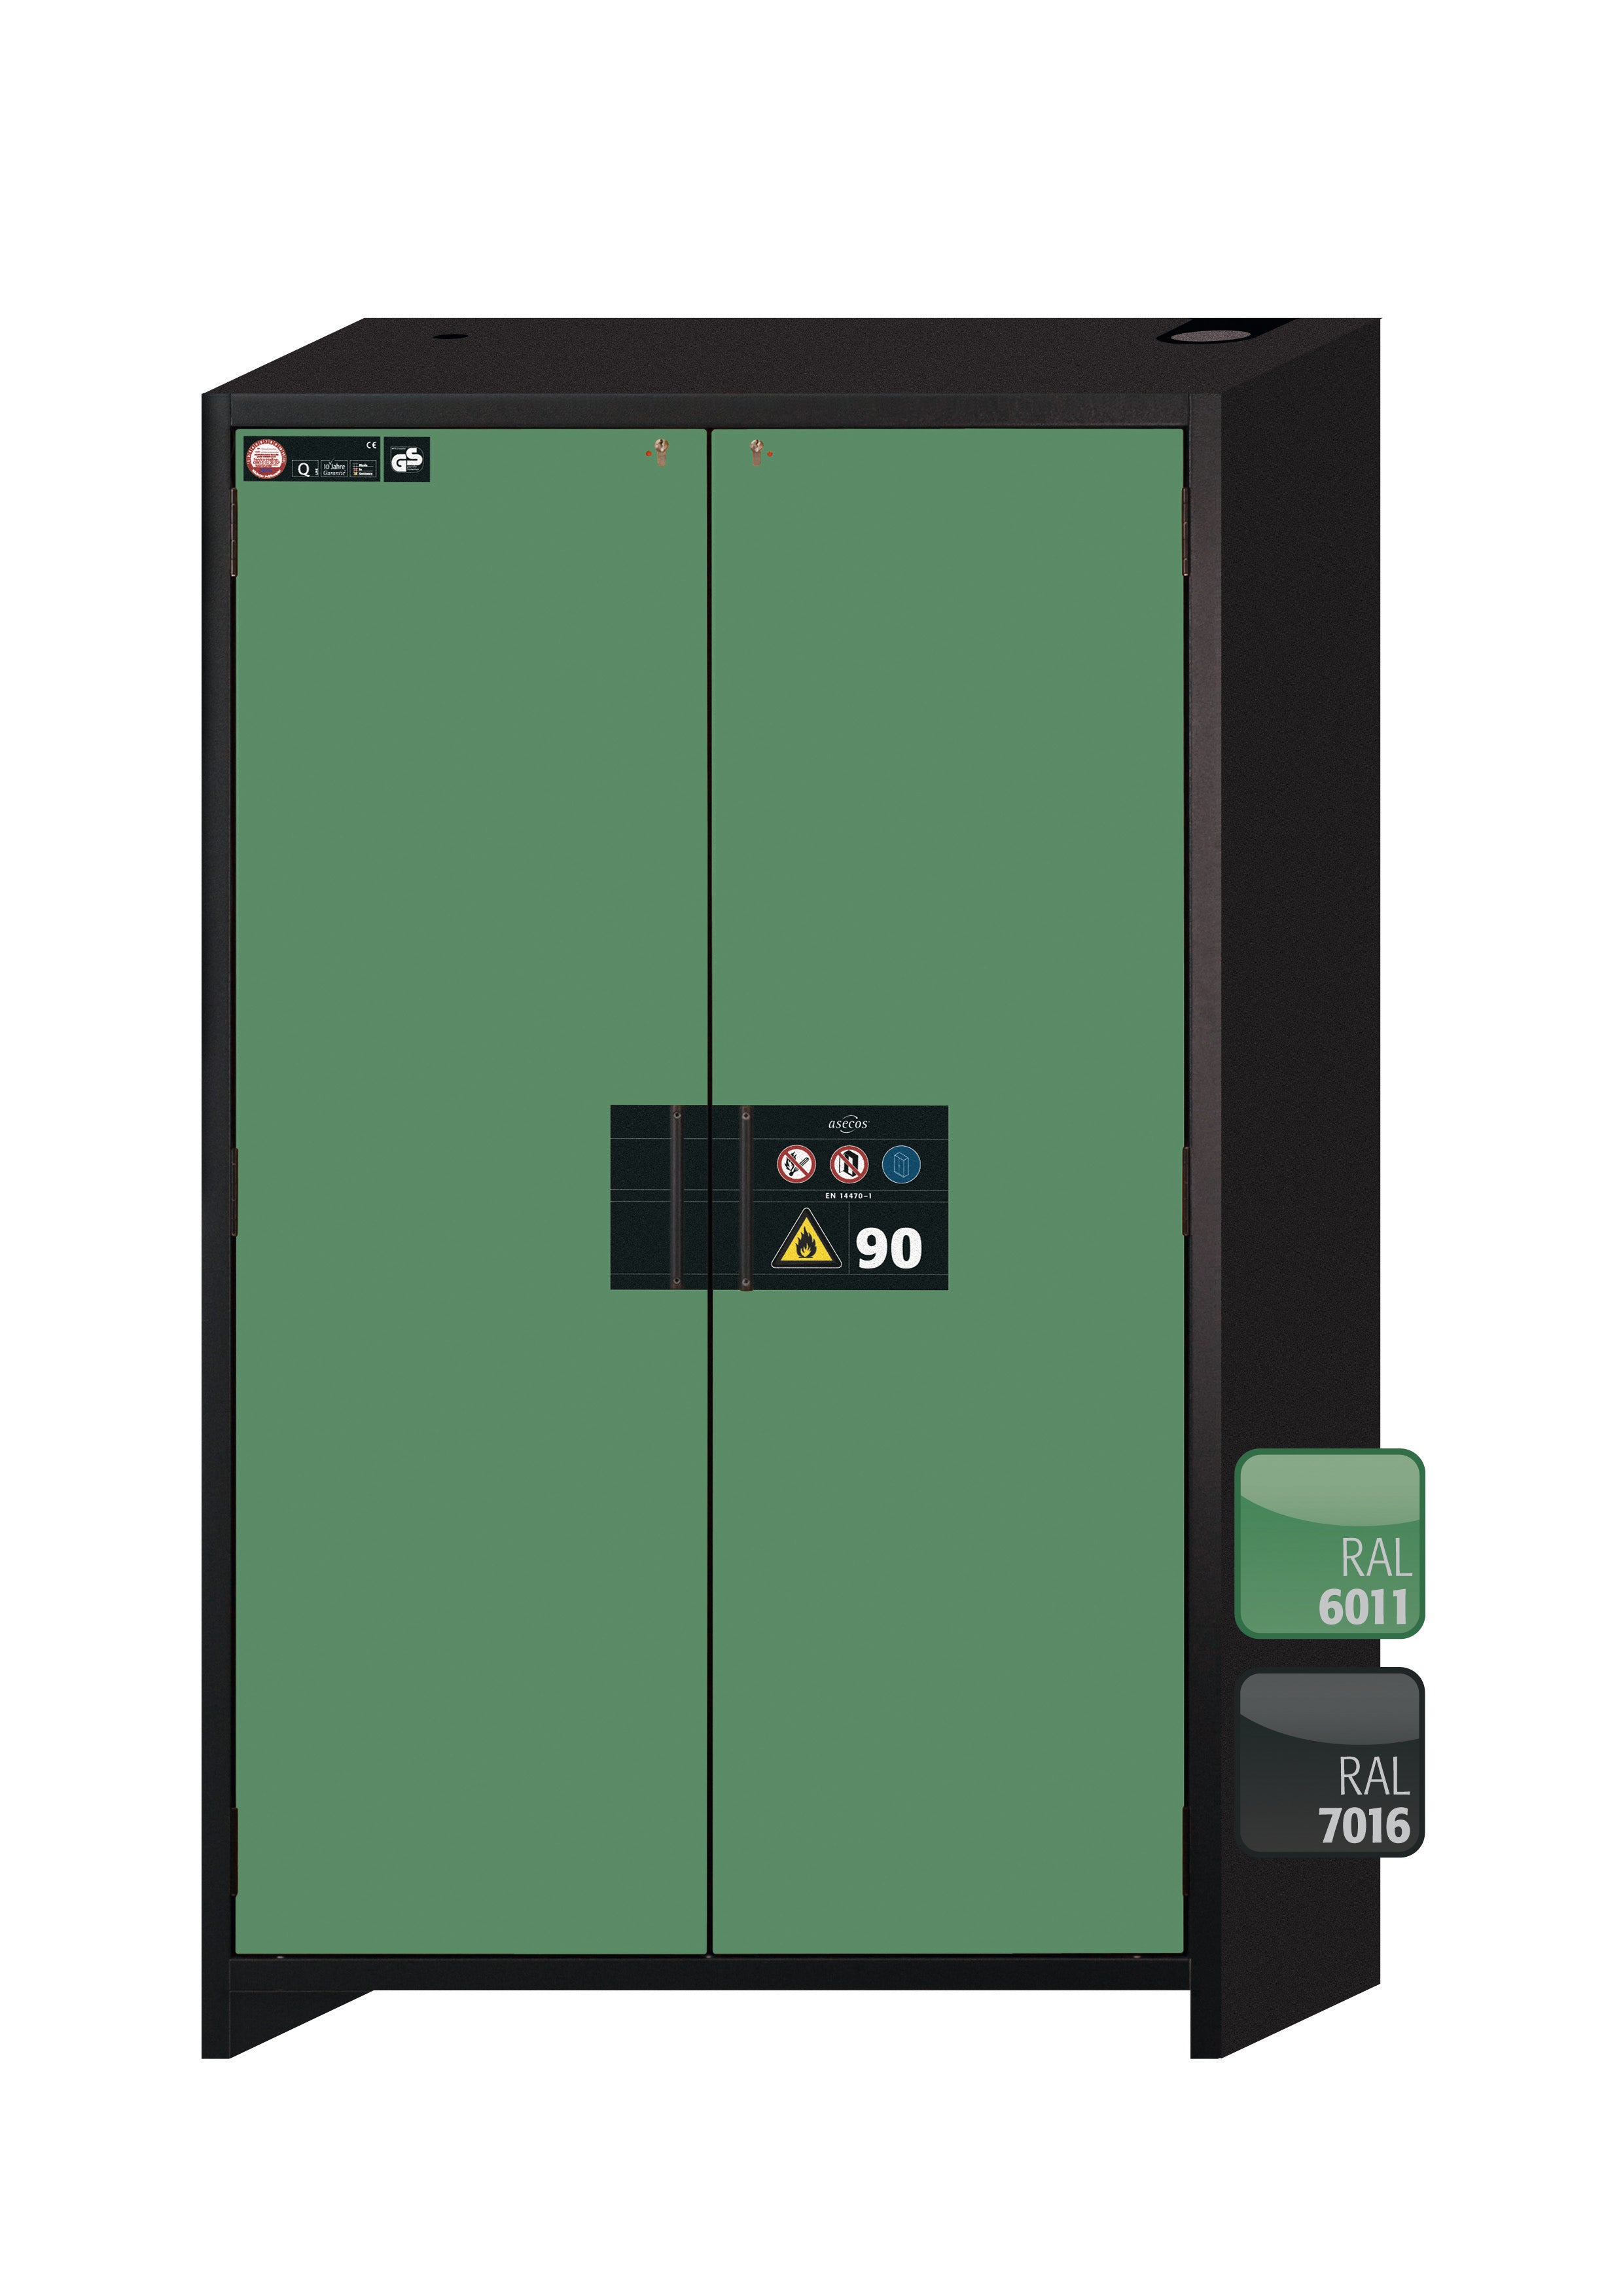 Type 90 safety storage cabinet Q-CLASSIC-90 model Q90.195.120 in reseda green RAL 6011 with 4x drawer (standard) (stainless steel 1.4301),